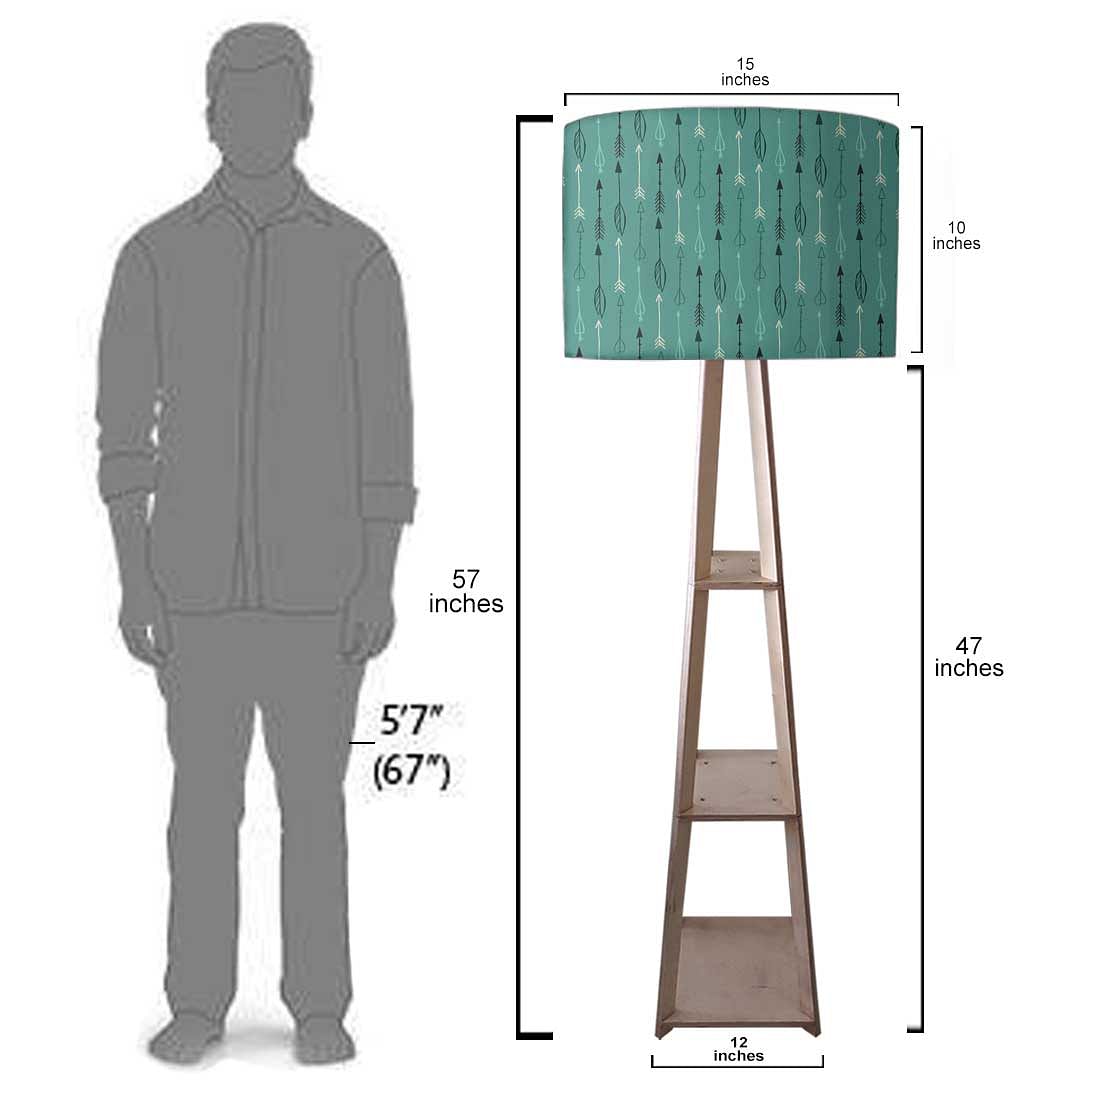 Floor Standing Lamps  -   Shades of Blue Nutcase